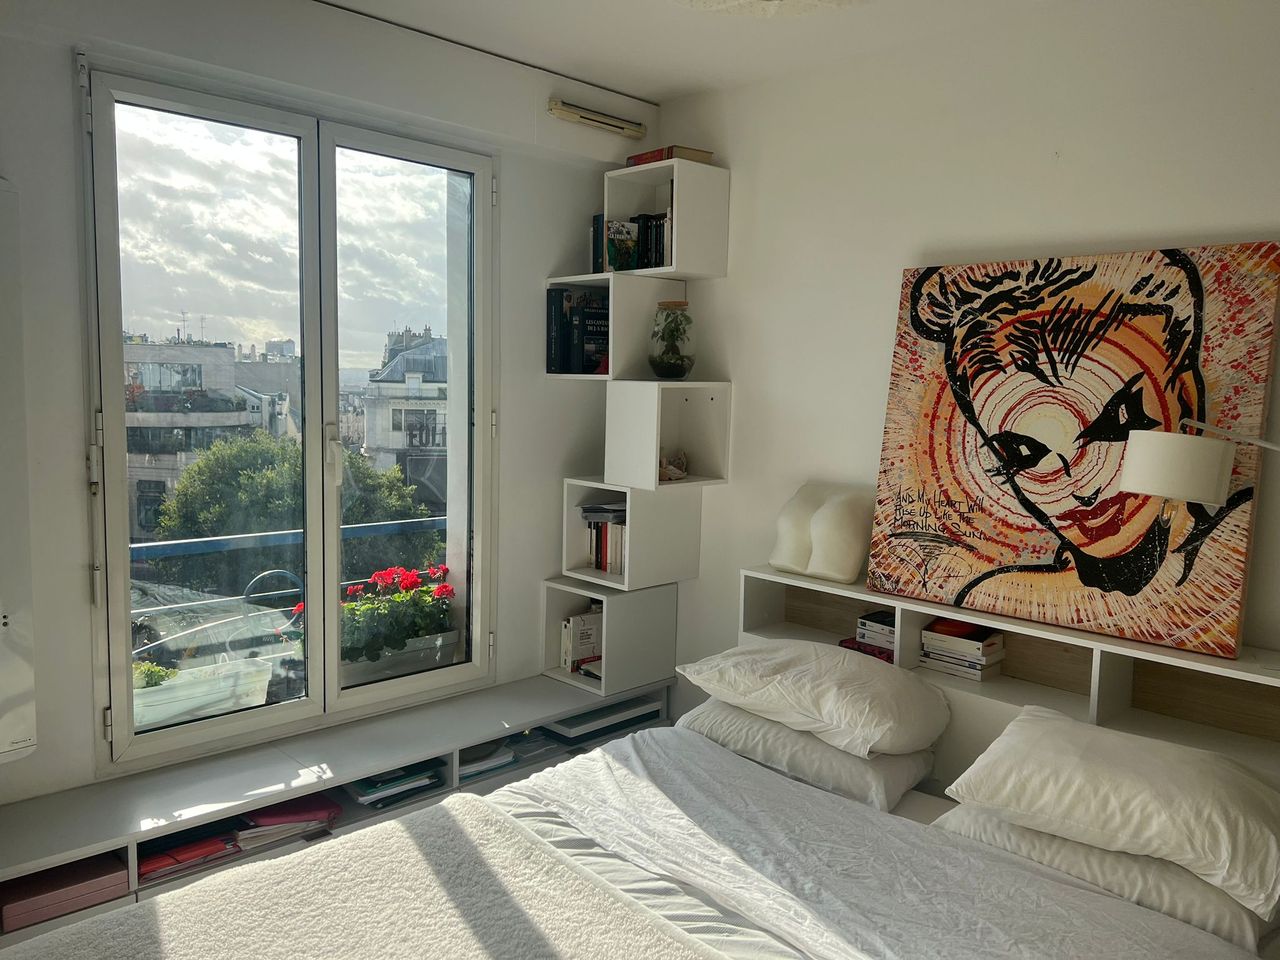 Suite Pigalle – The Heart of Pigalle